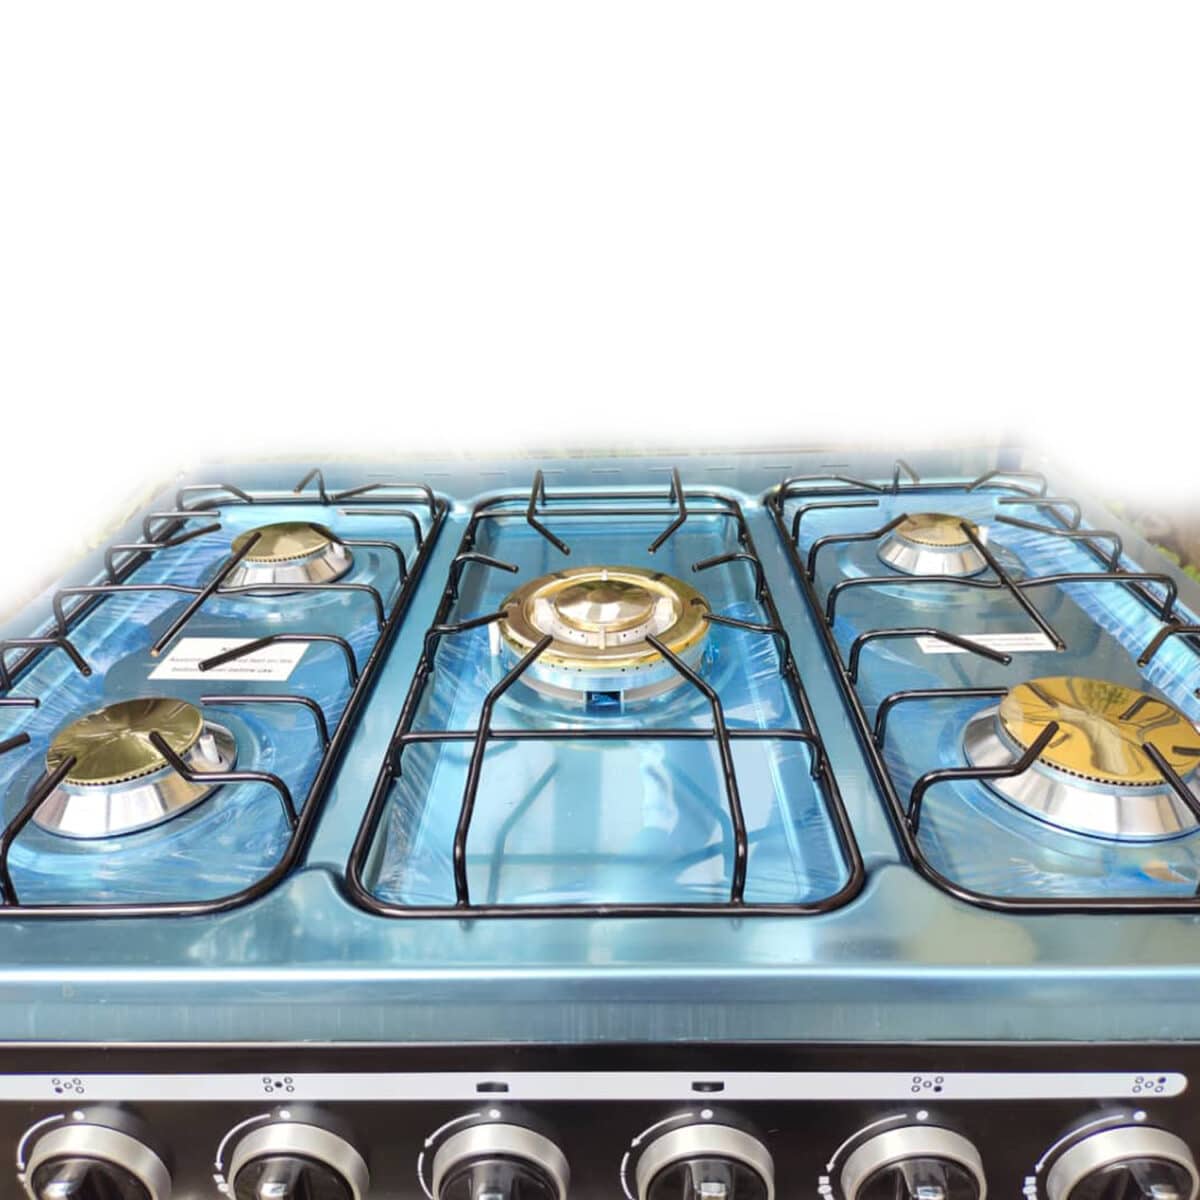 NOVO 5 Gas Burner with Oven and Grill